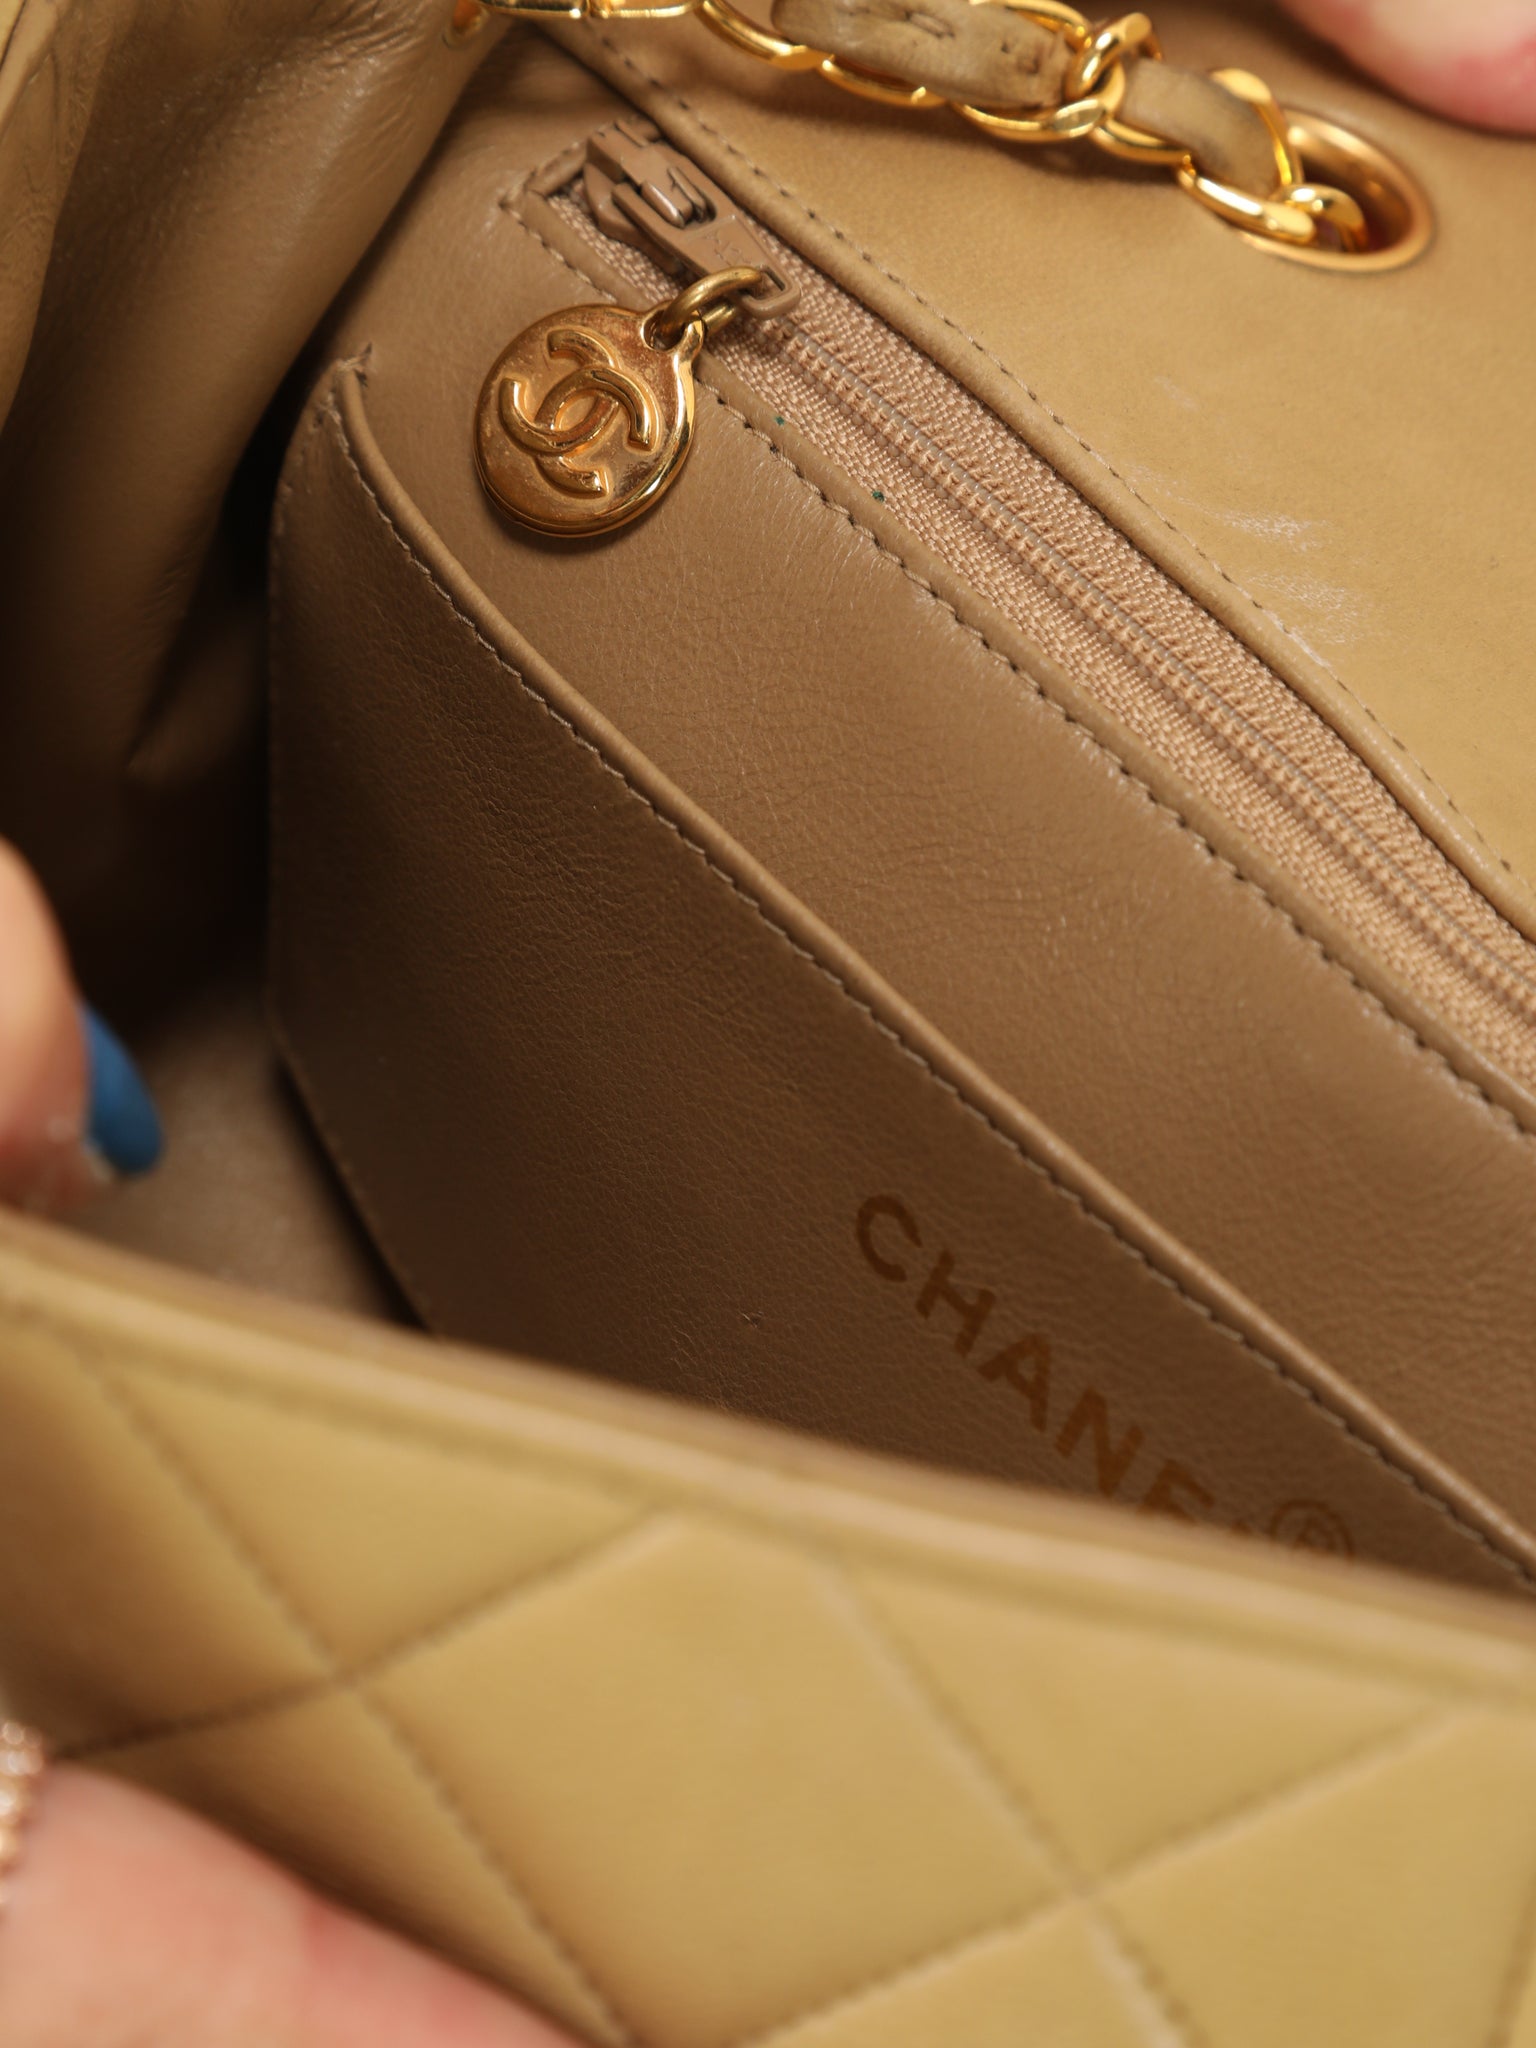 Chanel Taupe Small Diana Flap Bag